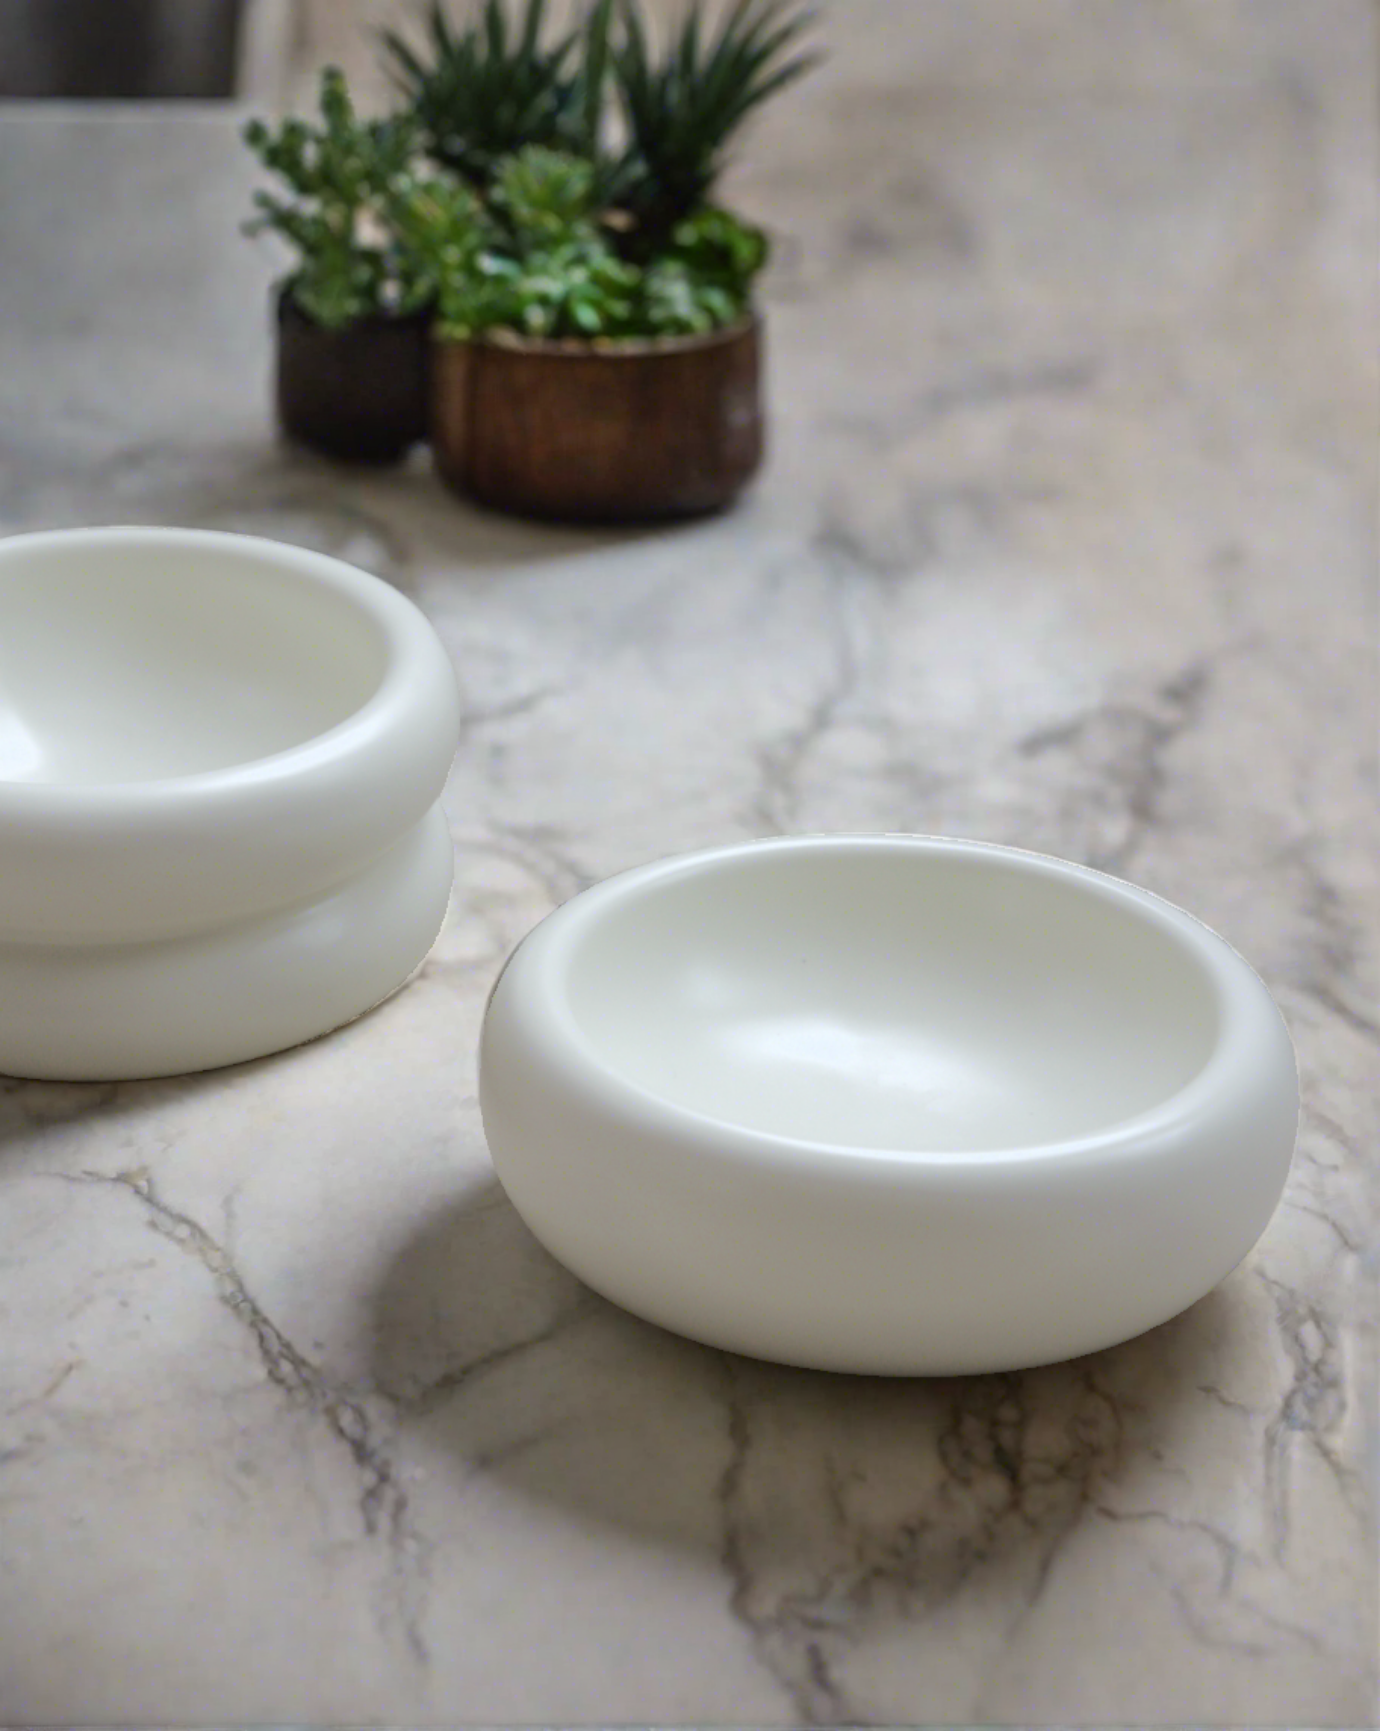 The Modern Muse Low Pet Bowl is crafted from quality ceramic, which is both chic and practical. Home decor friendly, this bowl can be paired with the Modern Muse Tall Pet Bowl for the perfect bowl combo.